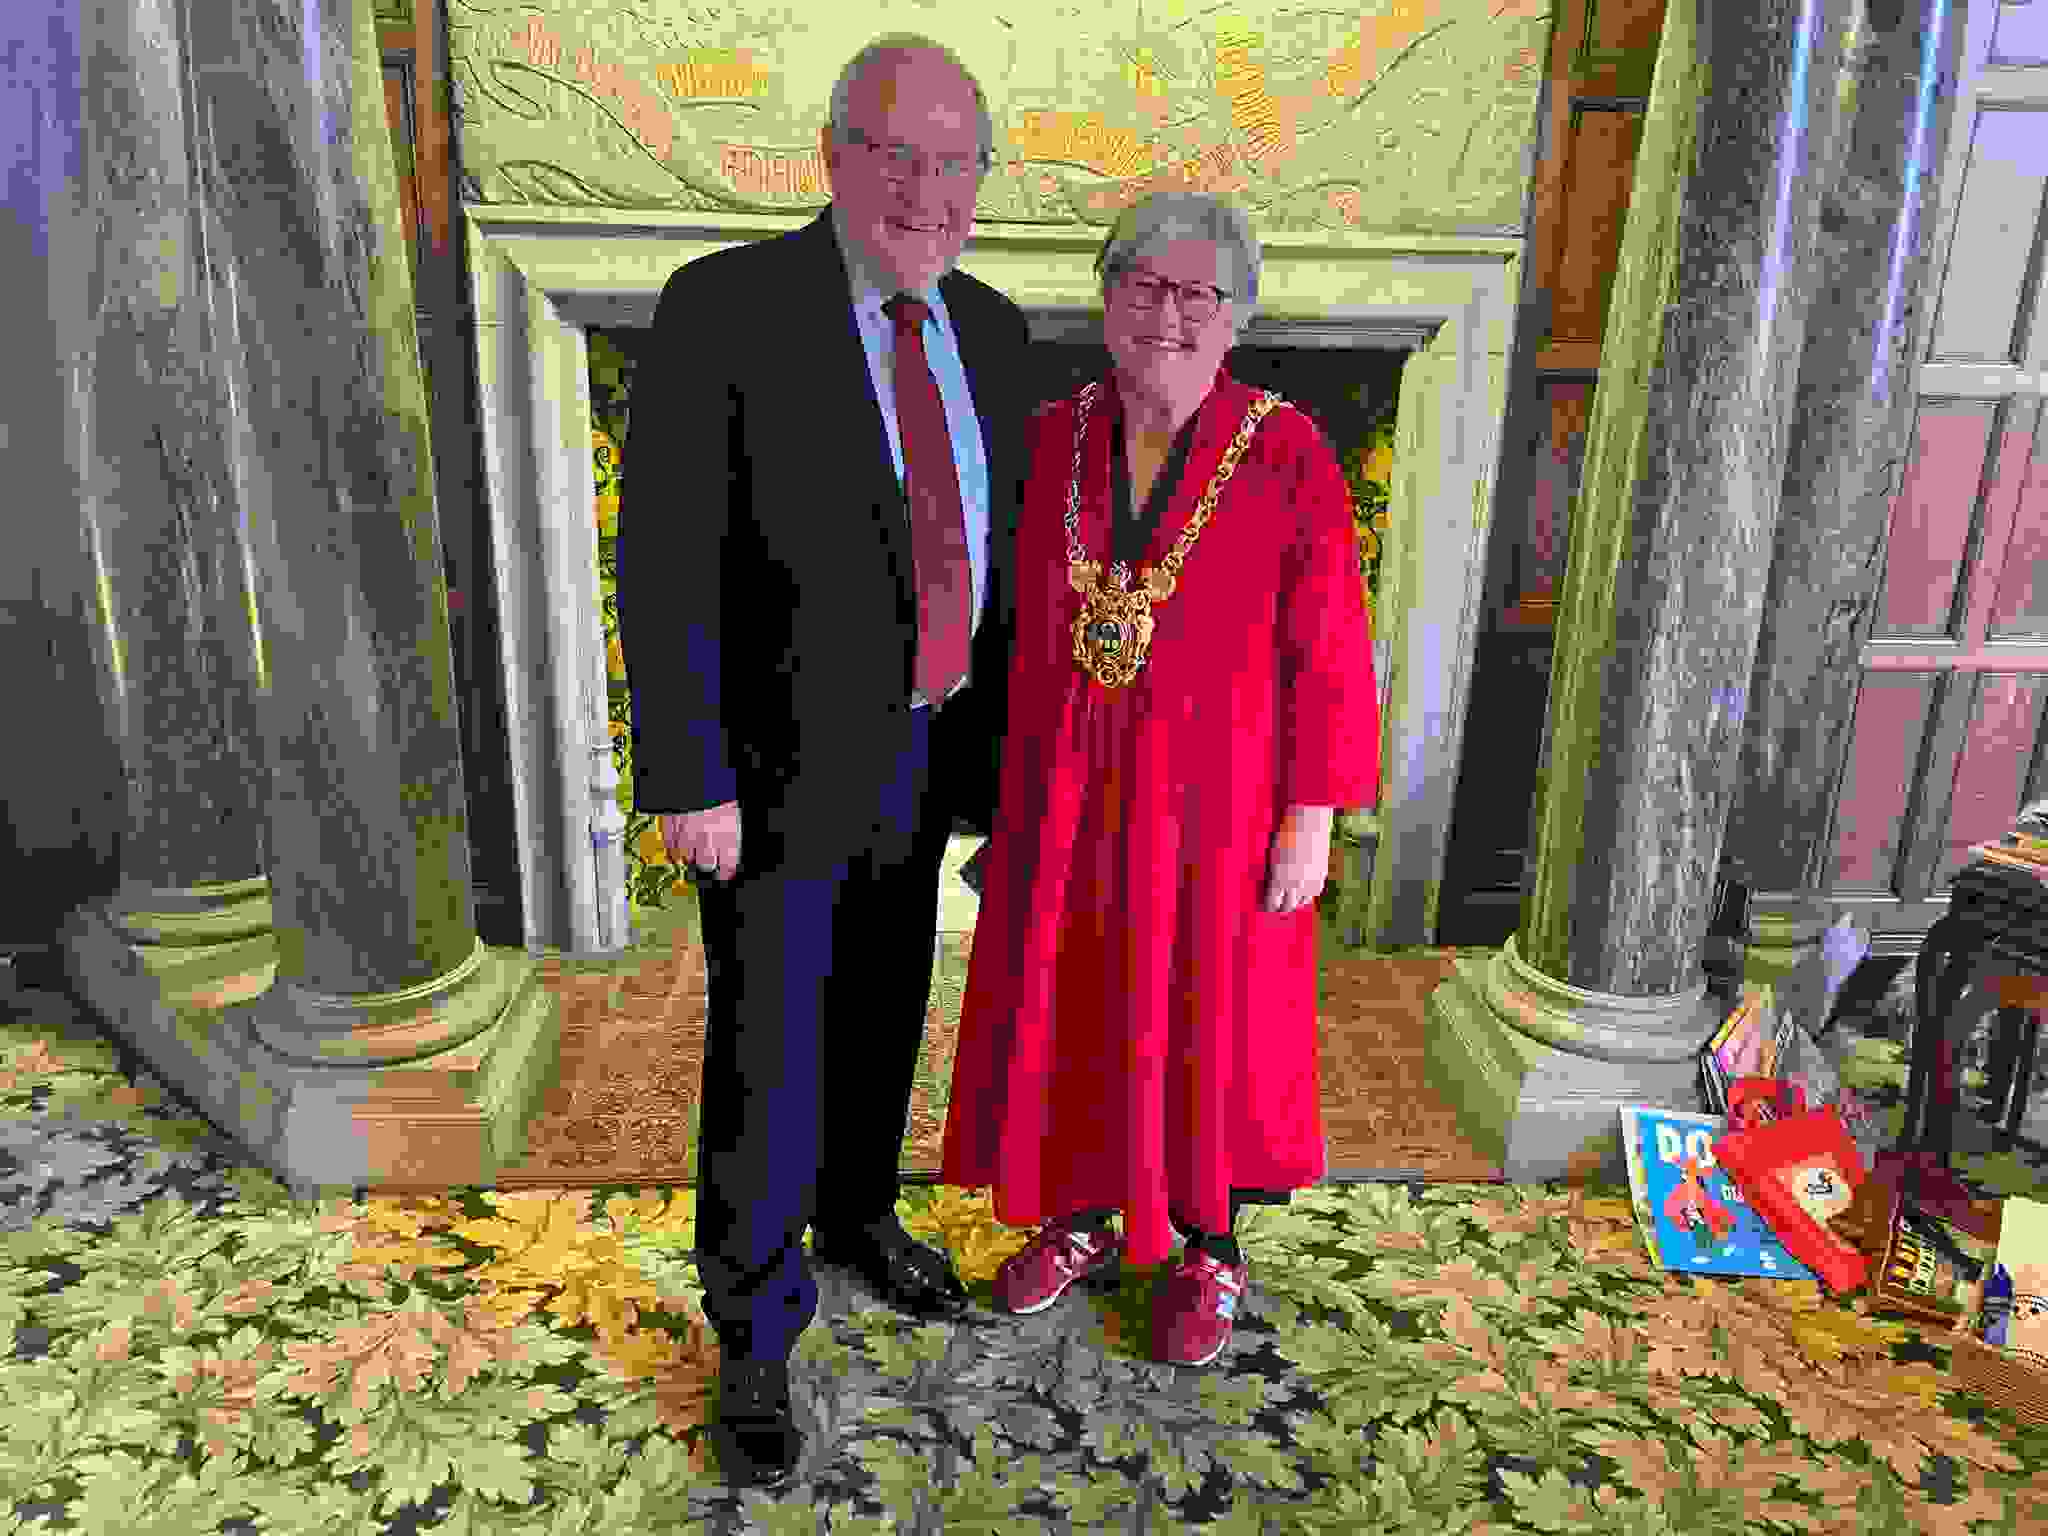 Richard Caborn stood next to Lord Mayor Sioned-Mair Richards in the Lord Mayor's parlour